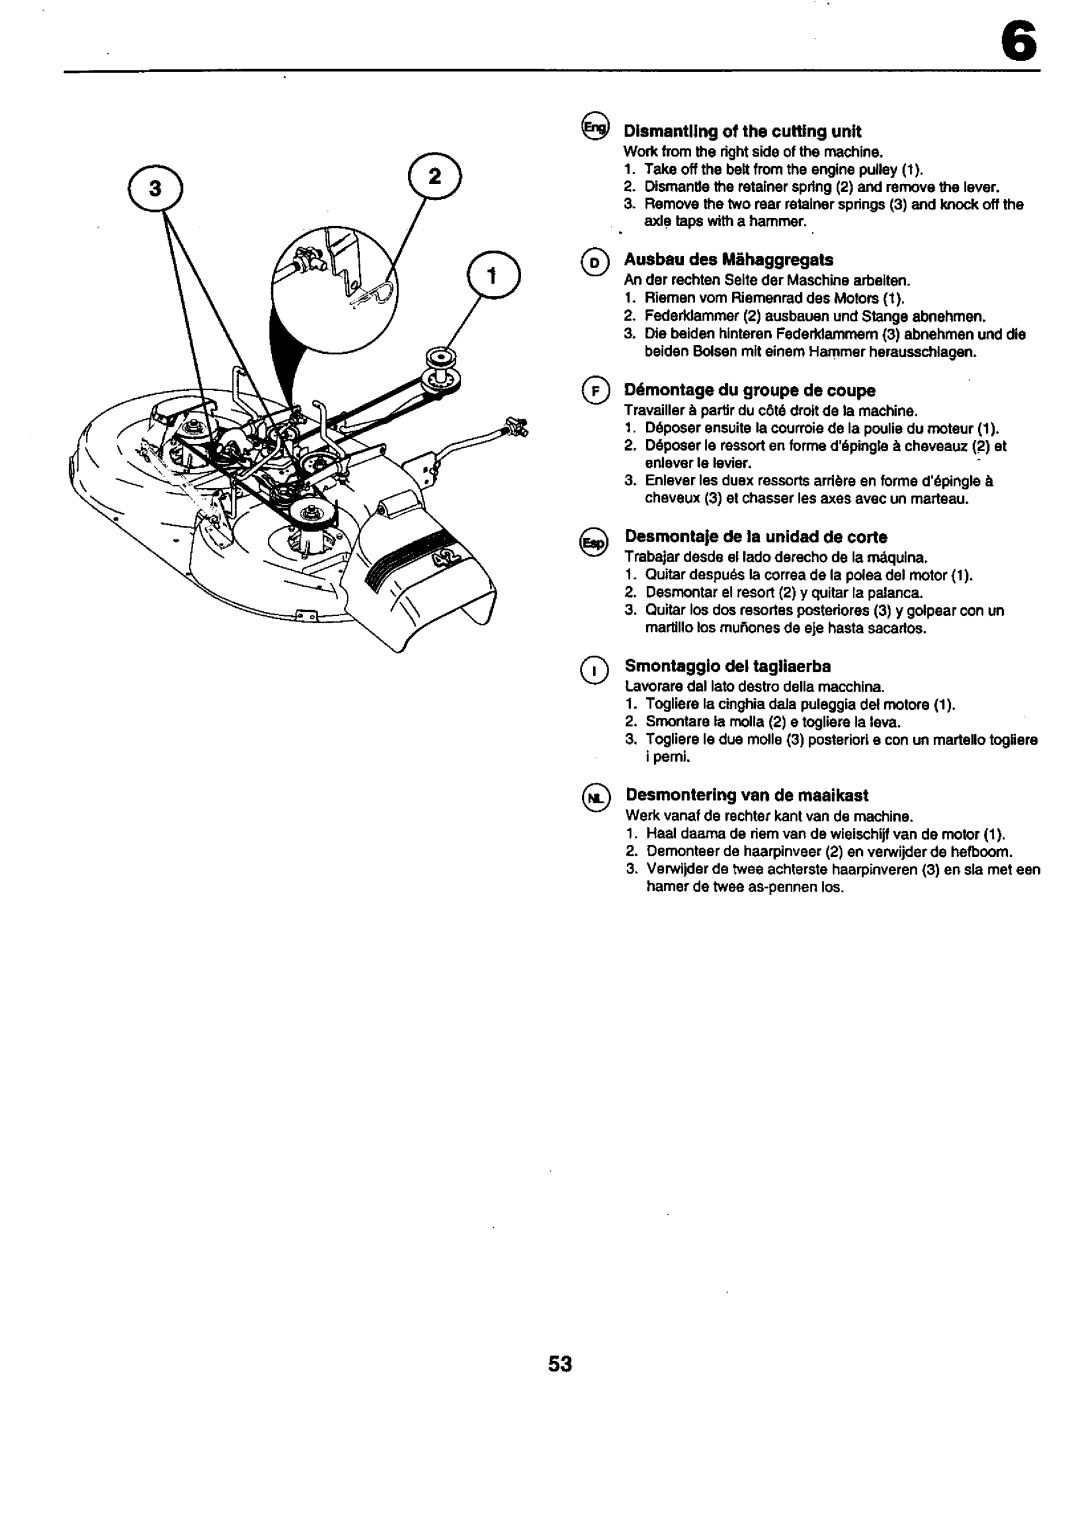 Craftsman 25949 instruction manual @Dismantling of the cutting unit, Work from_e nghtside of the machine 